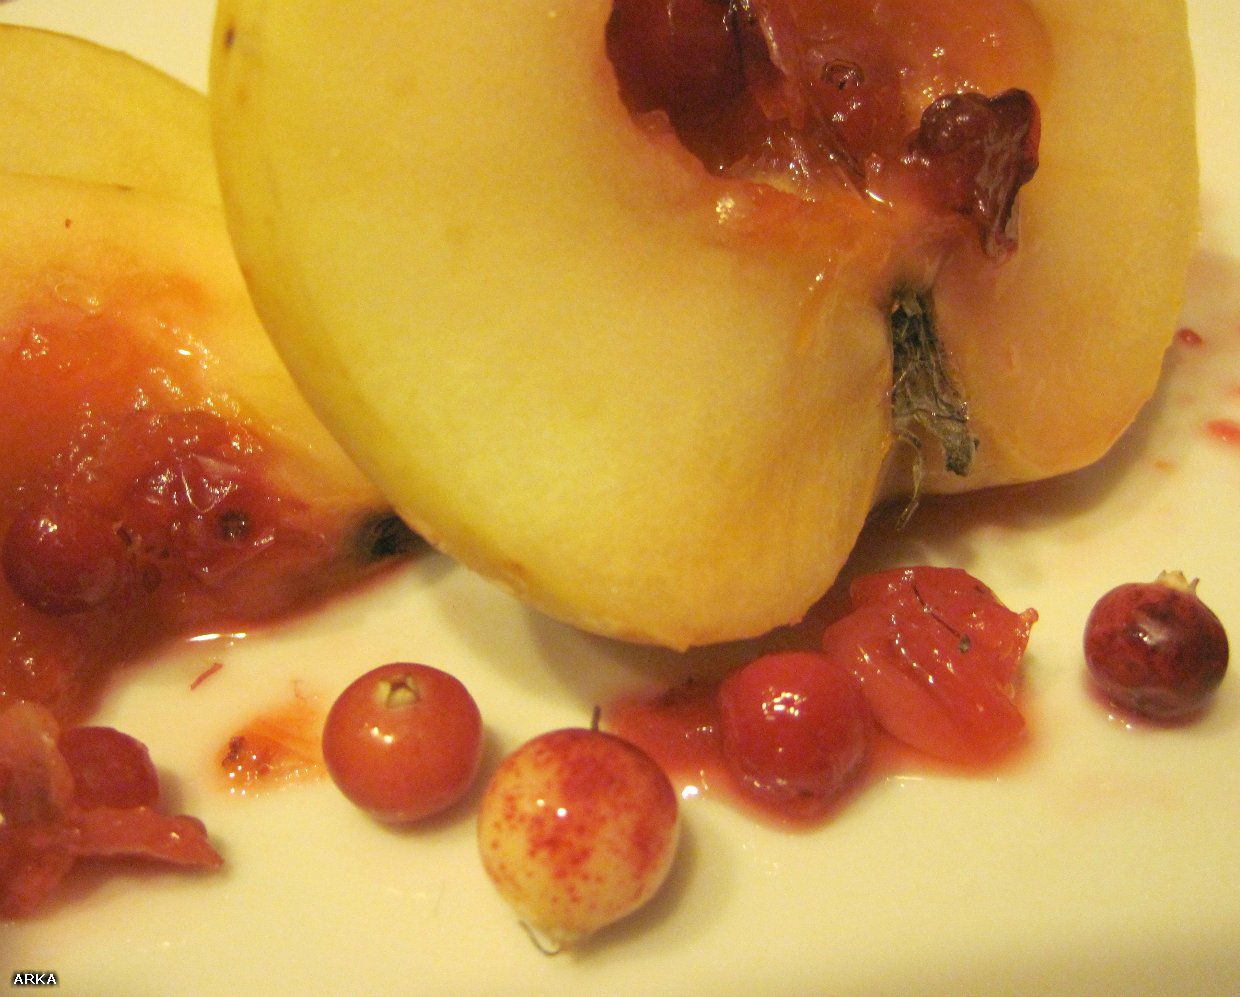 Baked apples with cranberries